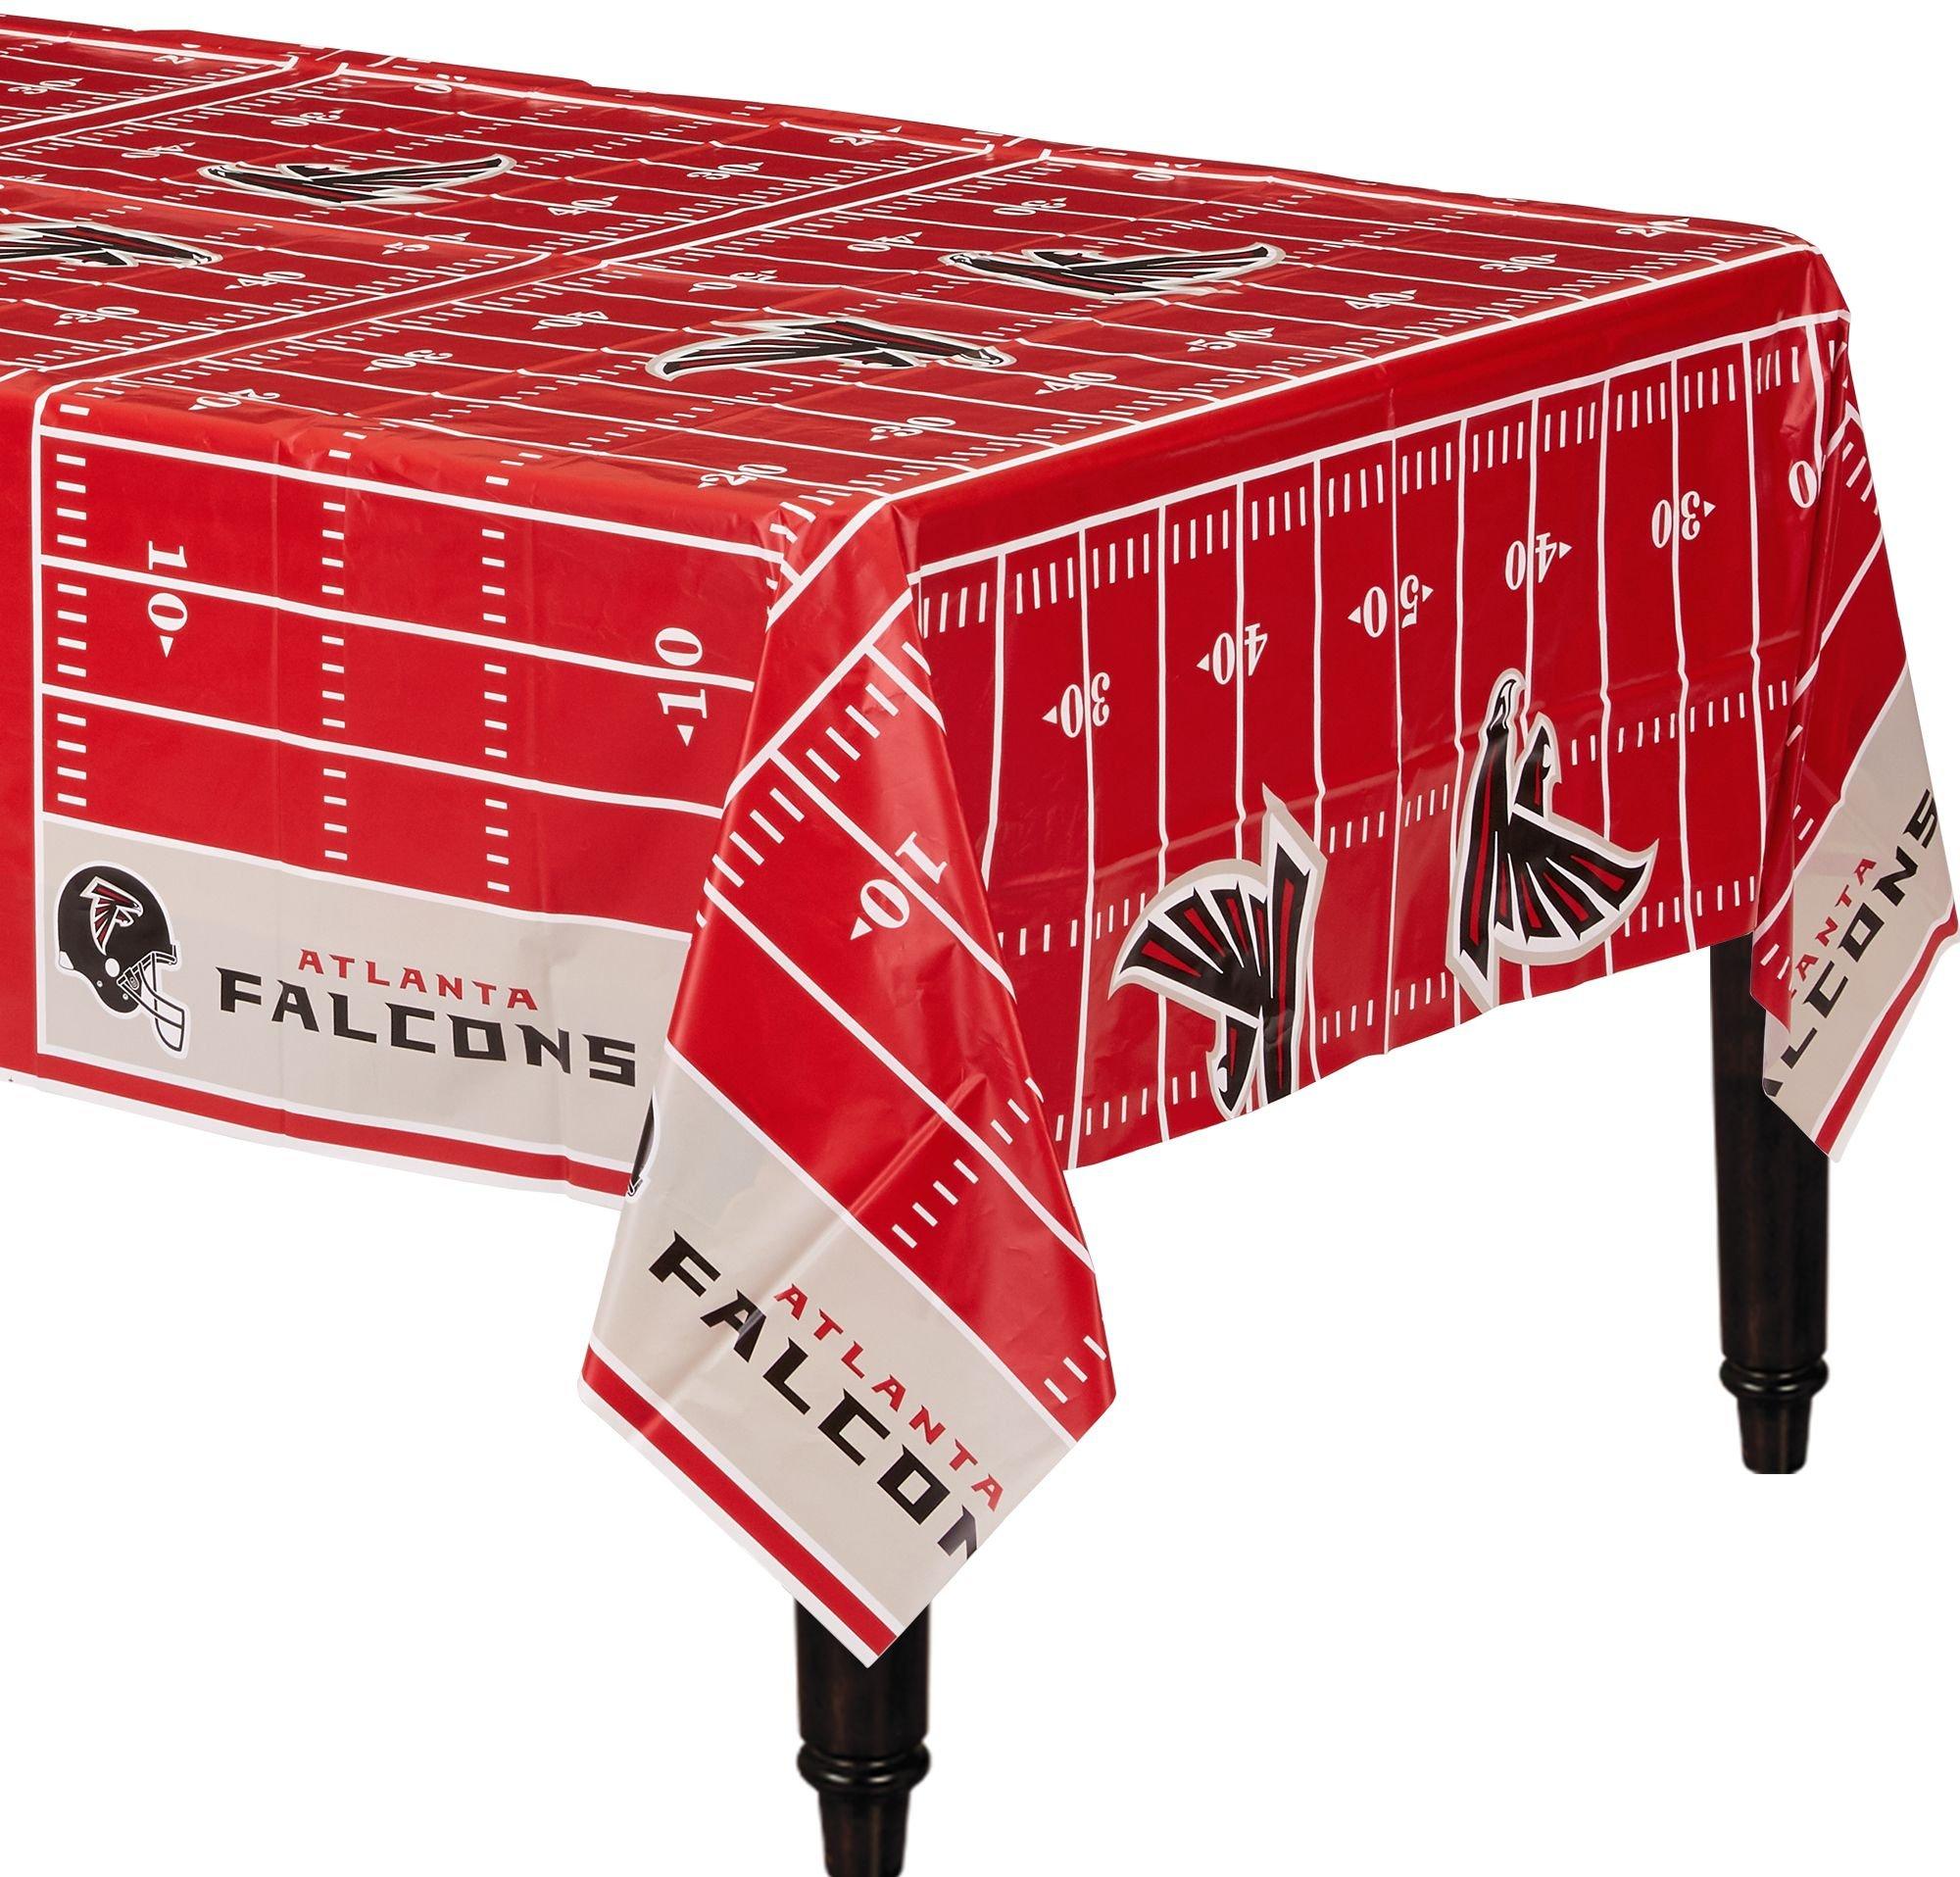 Atlanta Falcons Table Cover 54in x 96in | Party City